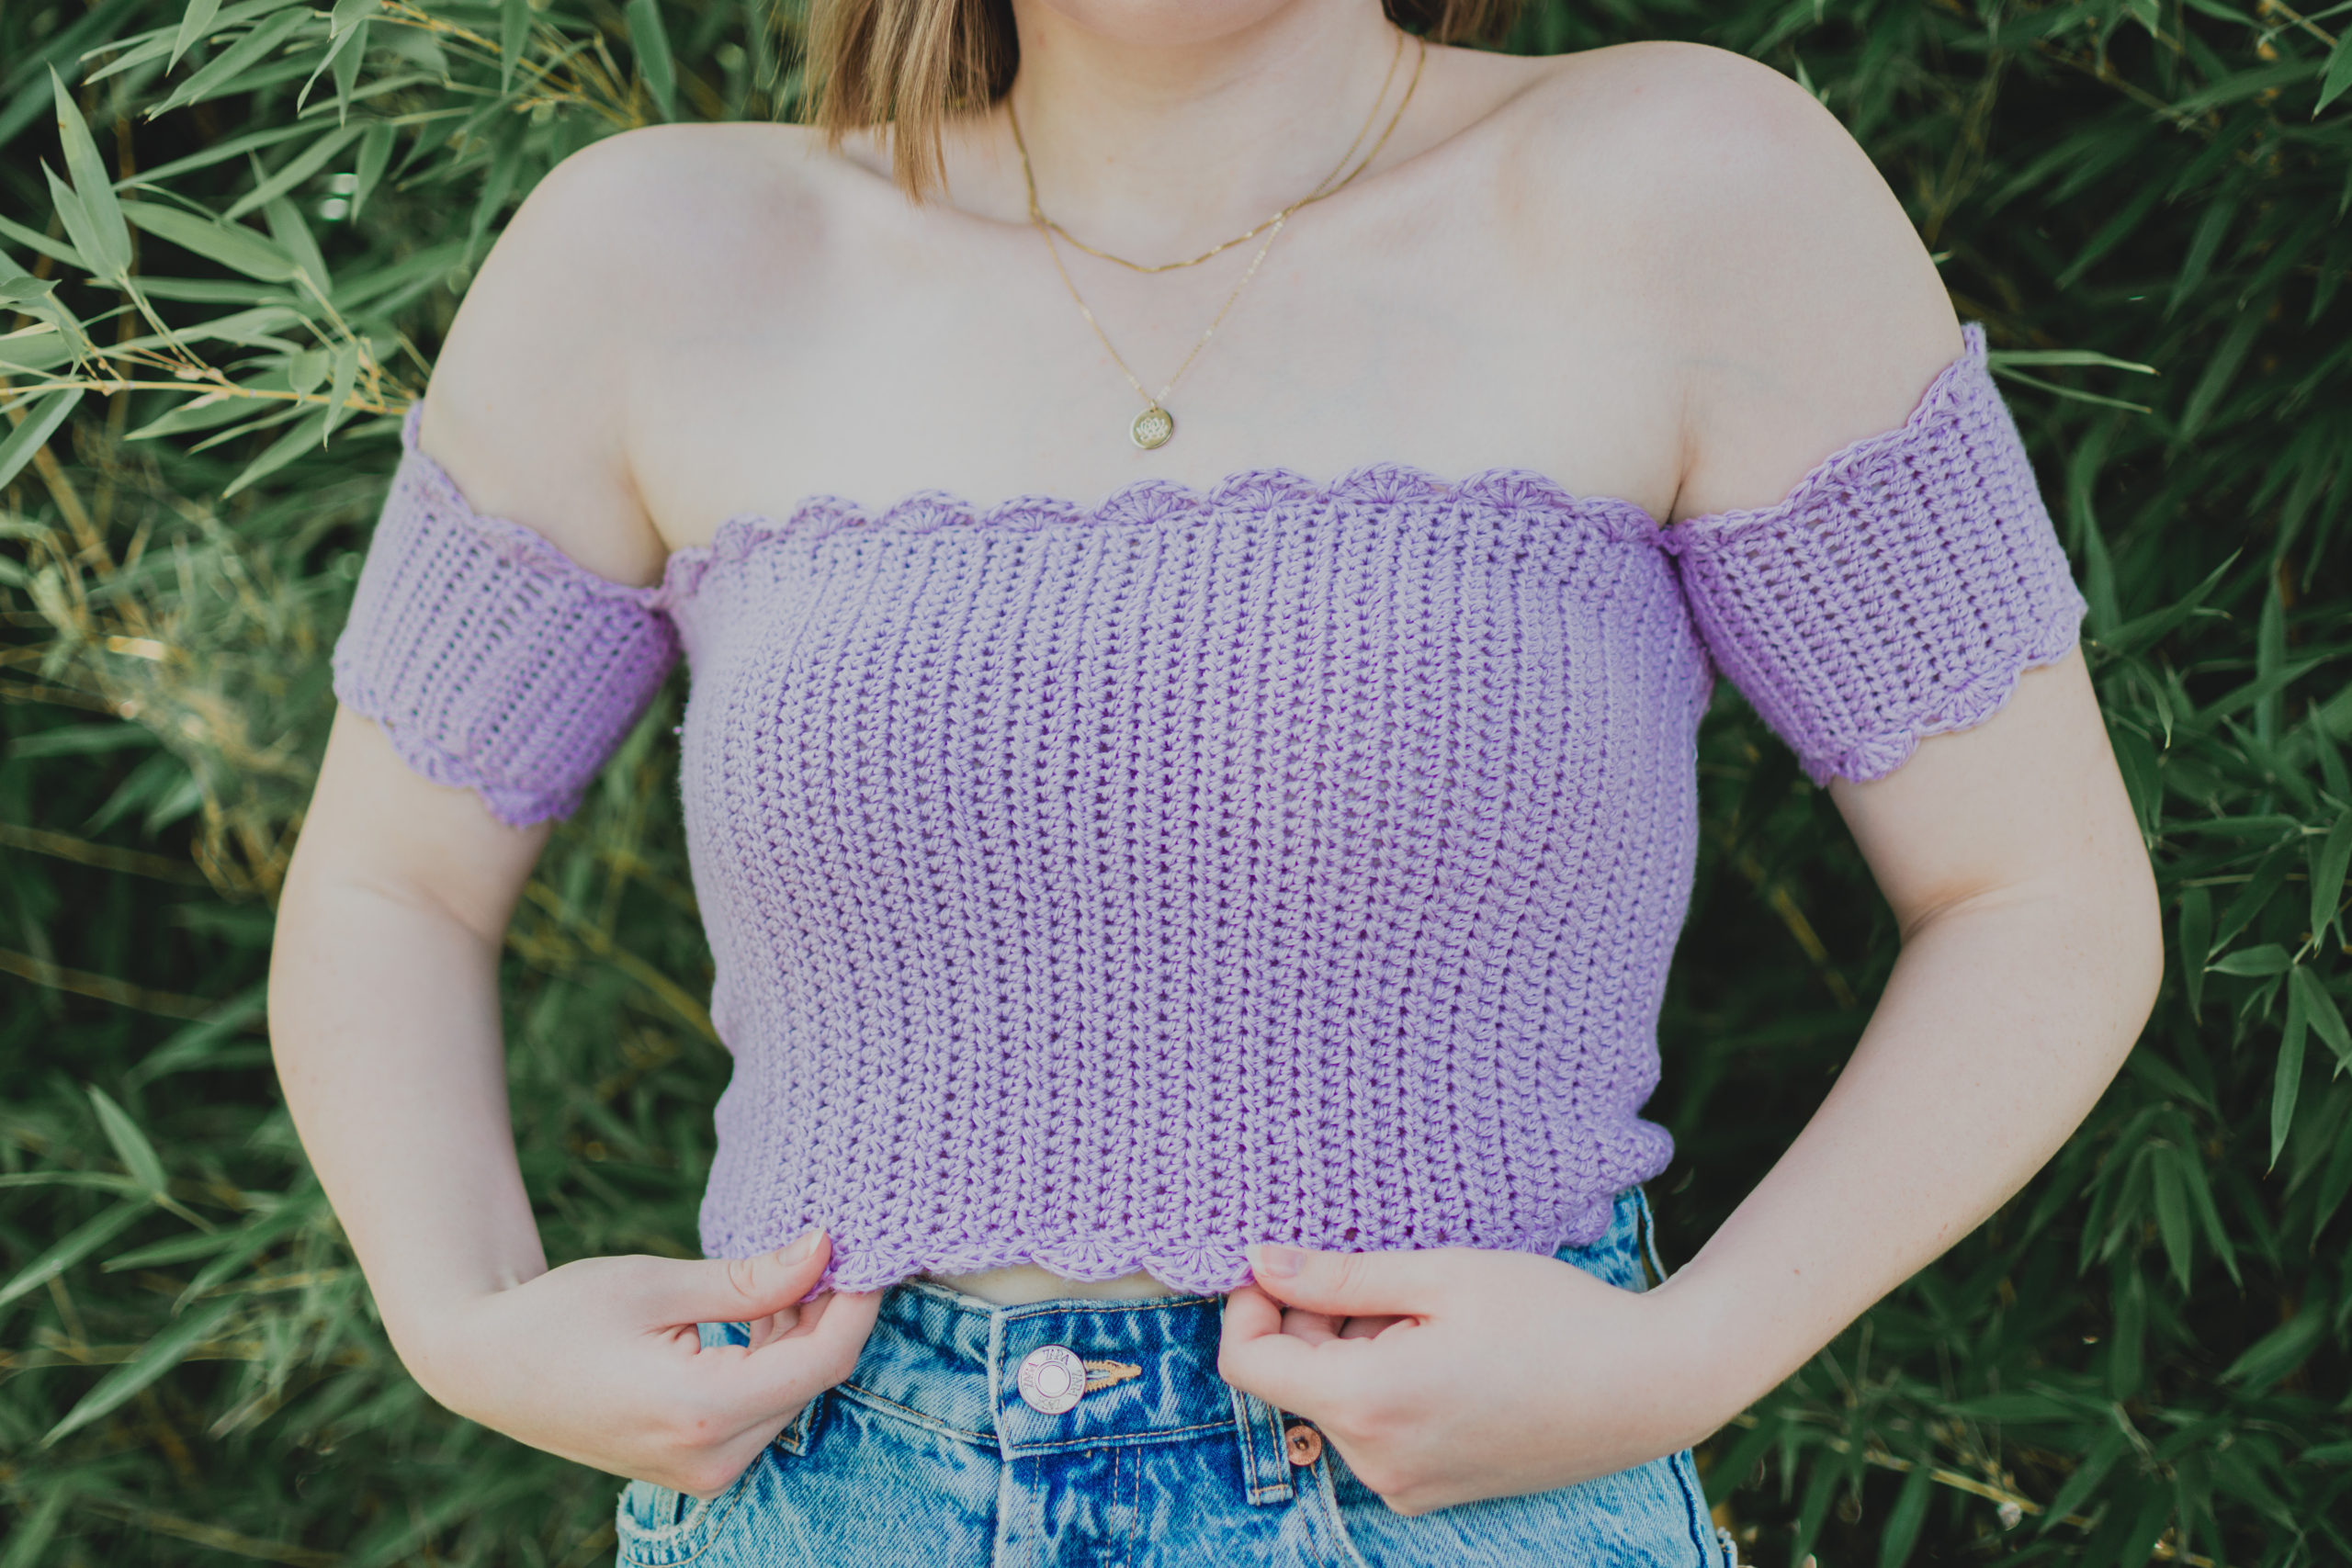 Learn How To Make Your Own Crochet Crop Top + Video Tutorial